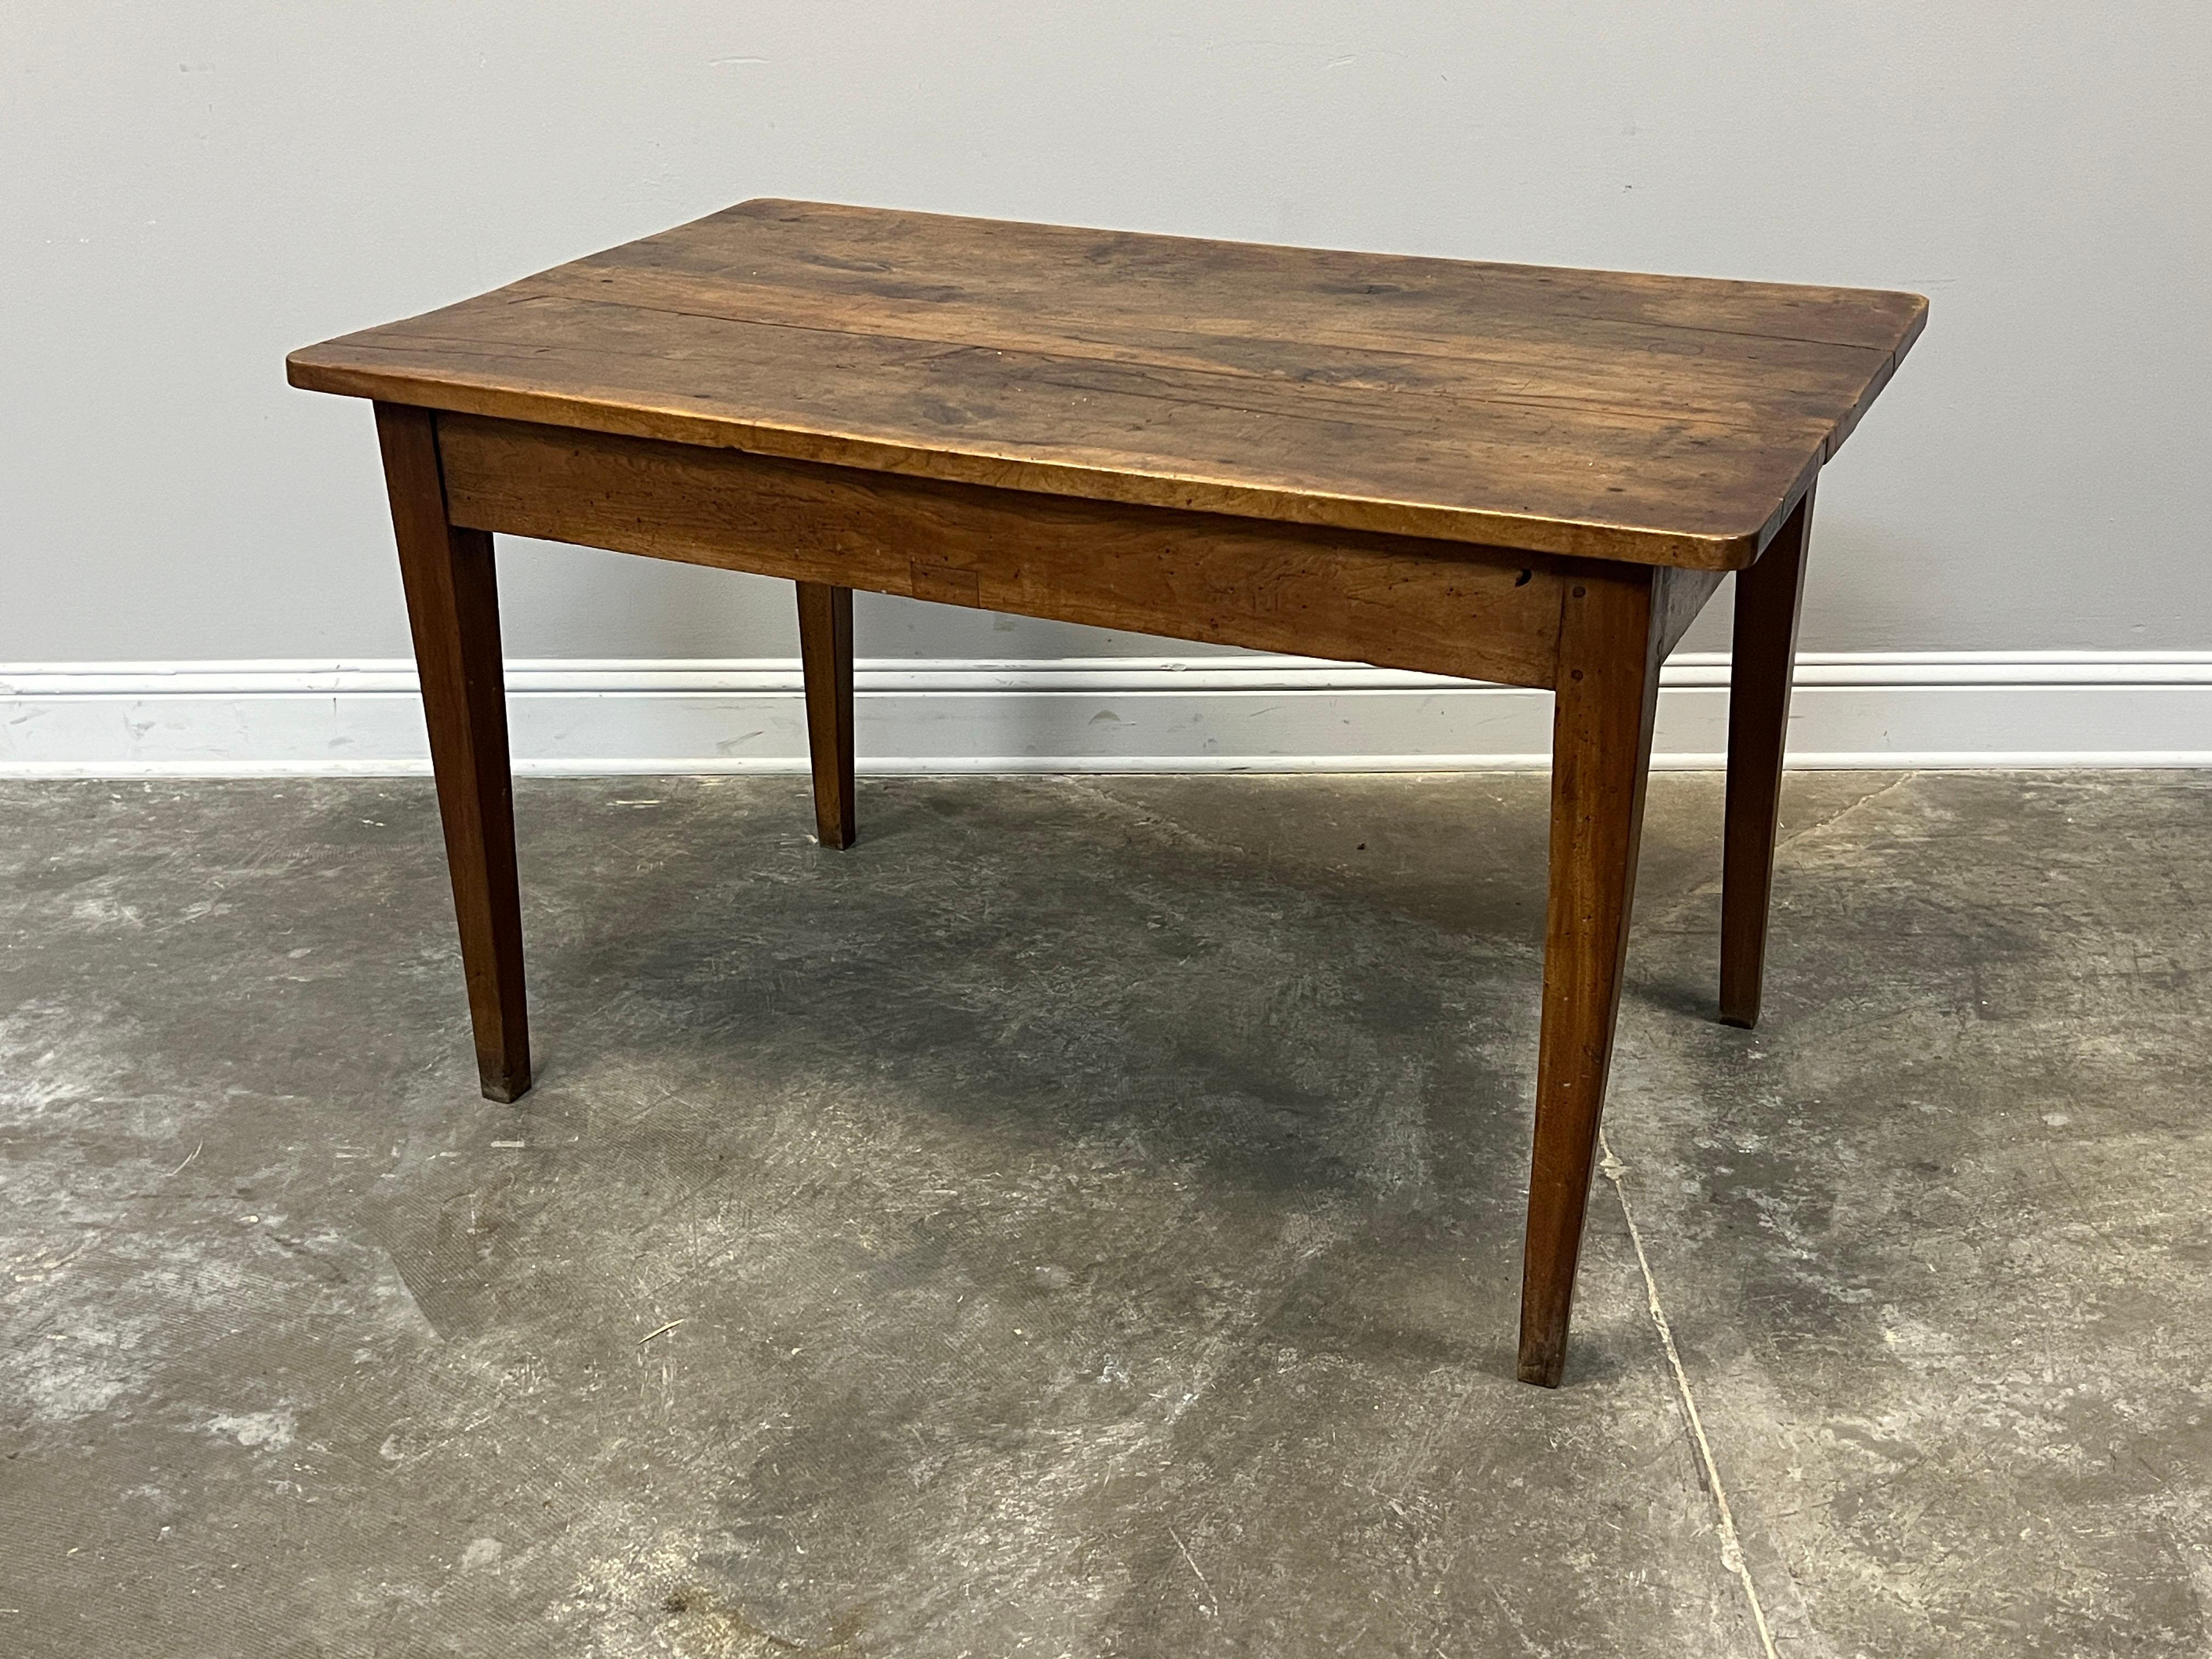 Classic French Provincial farm table in walnut with two drawers, waxed and polished finish. Hand constructed with planed boards, dovetailed drawers and pegged joints. Best used maybe at home in the kitchen or as a desk elsewhere in the home.

Hand